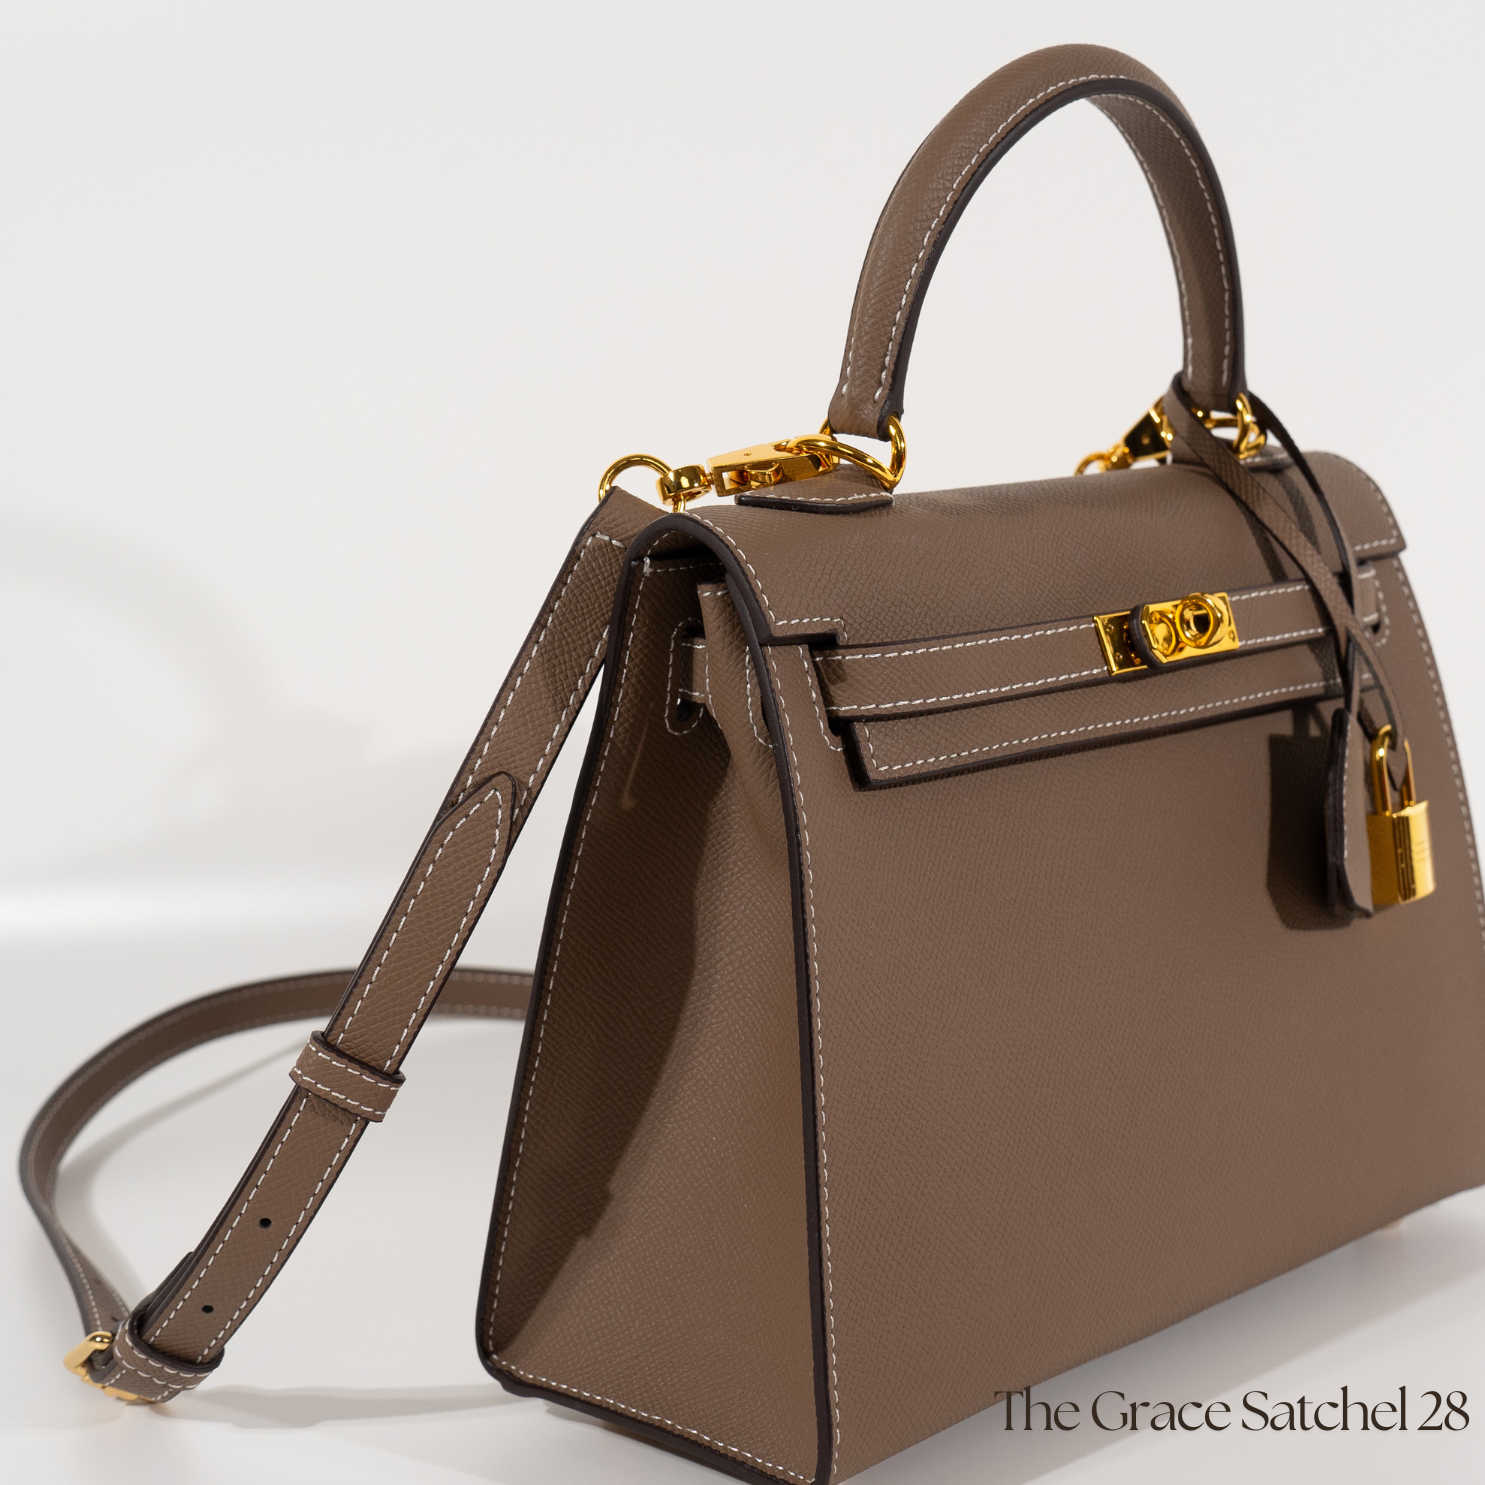 The Grace 28 Satchel Epsom Leather in Etoupe GHW by The Look